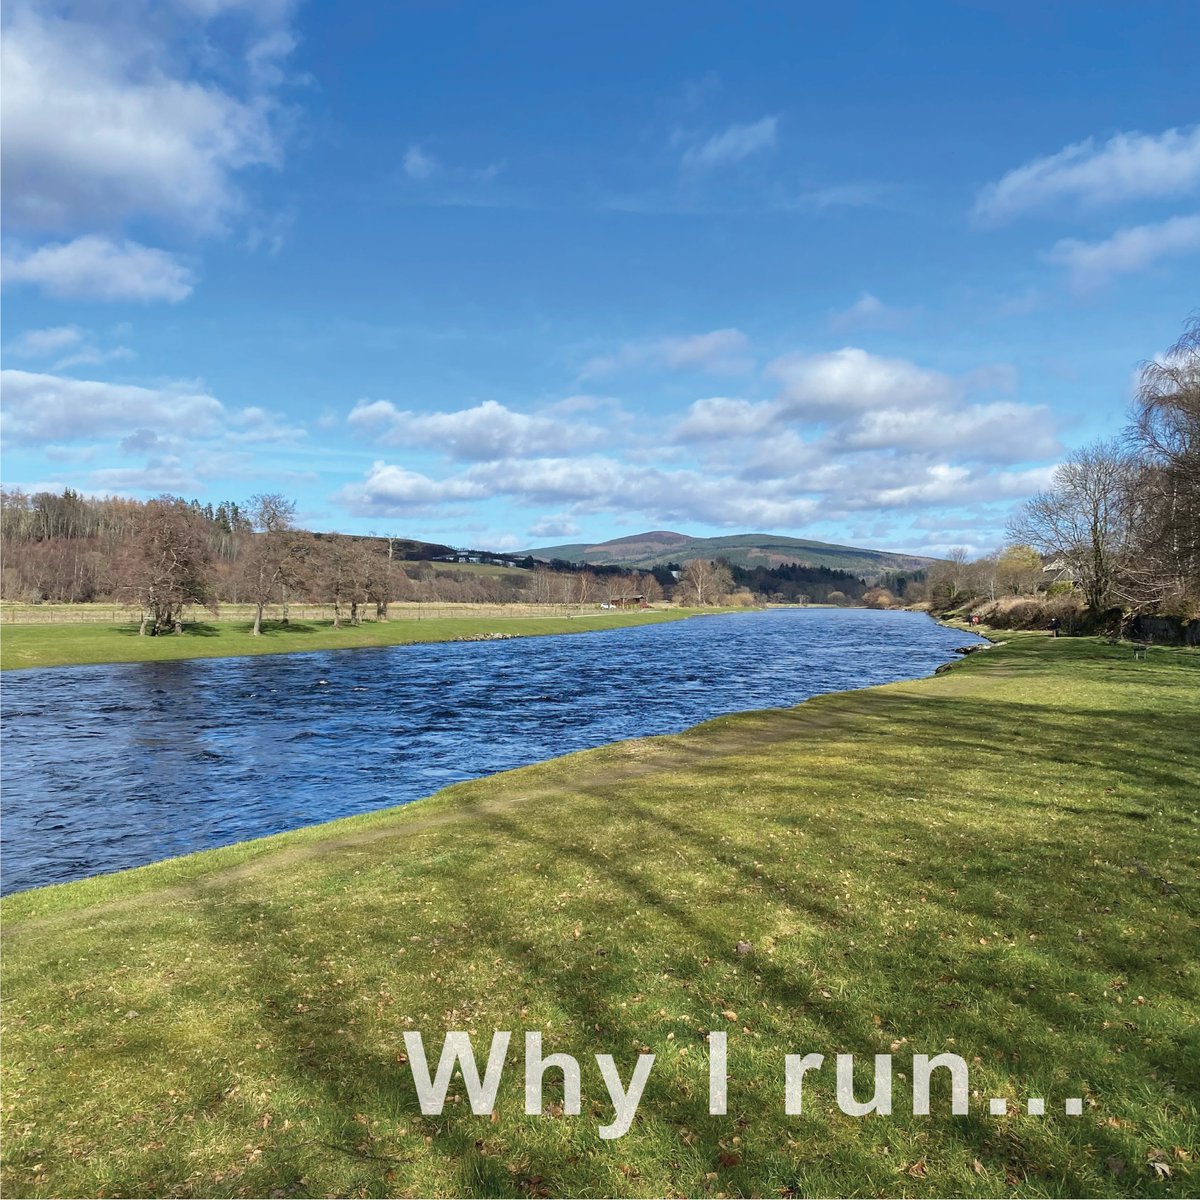 My reason for running is to explore new places and for the sense of achievement after setting and achieving personal goals #whyirun #ukrunchat #scottishrunning #scottishrunner #scottishrunningguide #scottishathletics #scottish10k